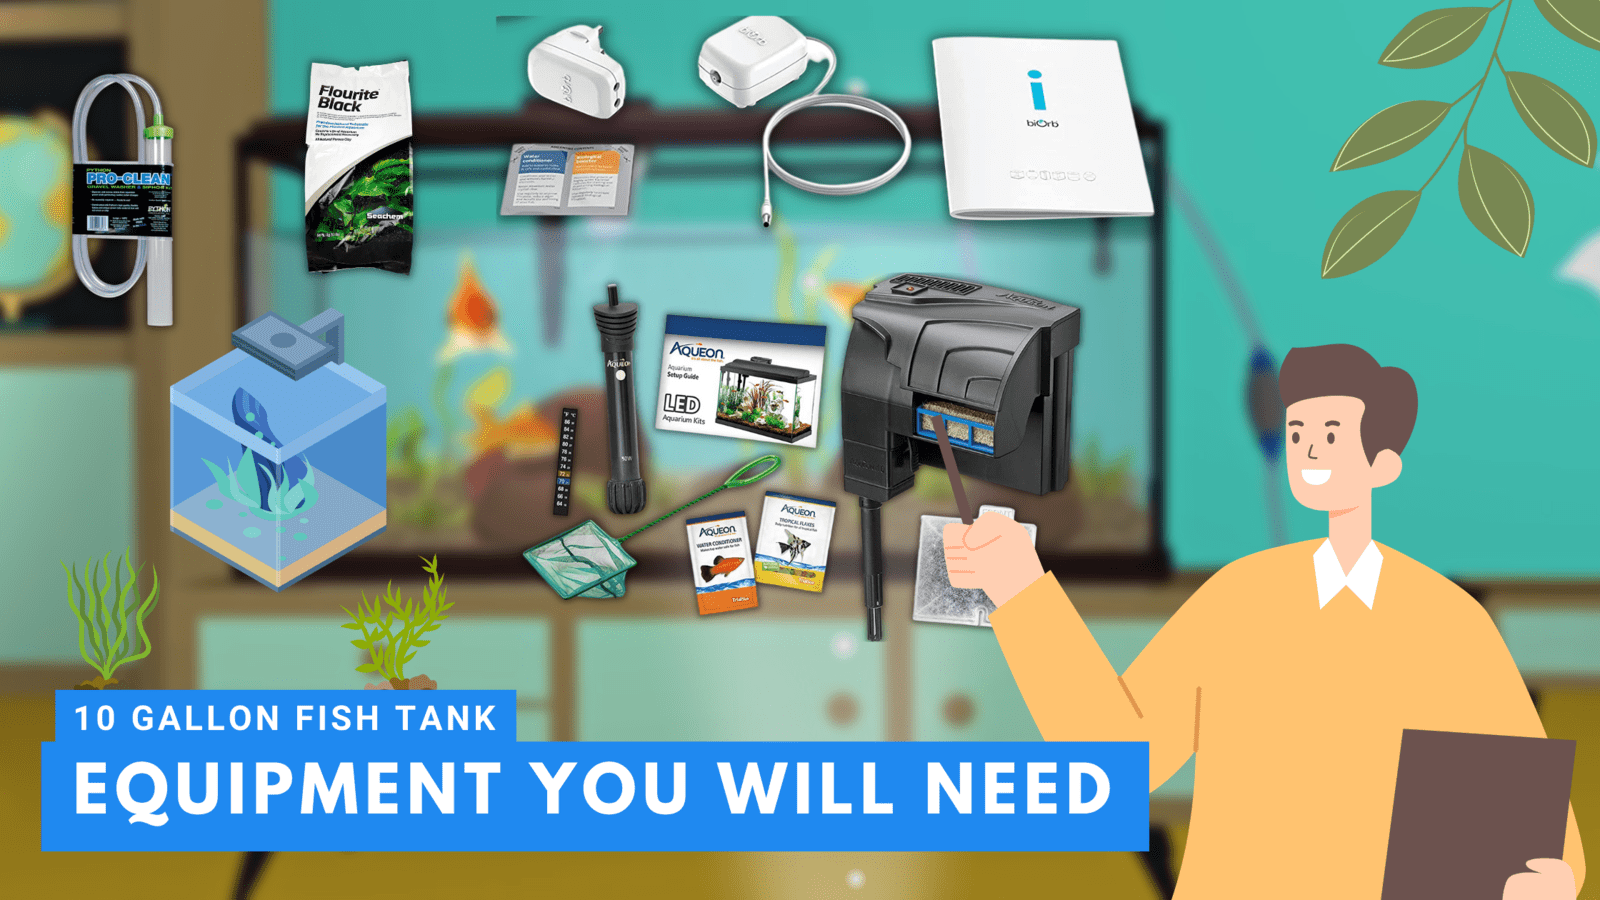 Equipment-You-Will-Need-For-A-10-Gallon-Fish-Tank